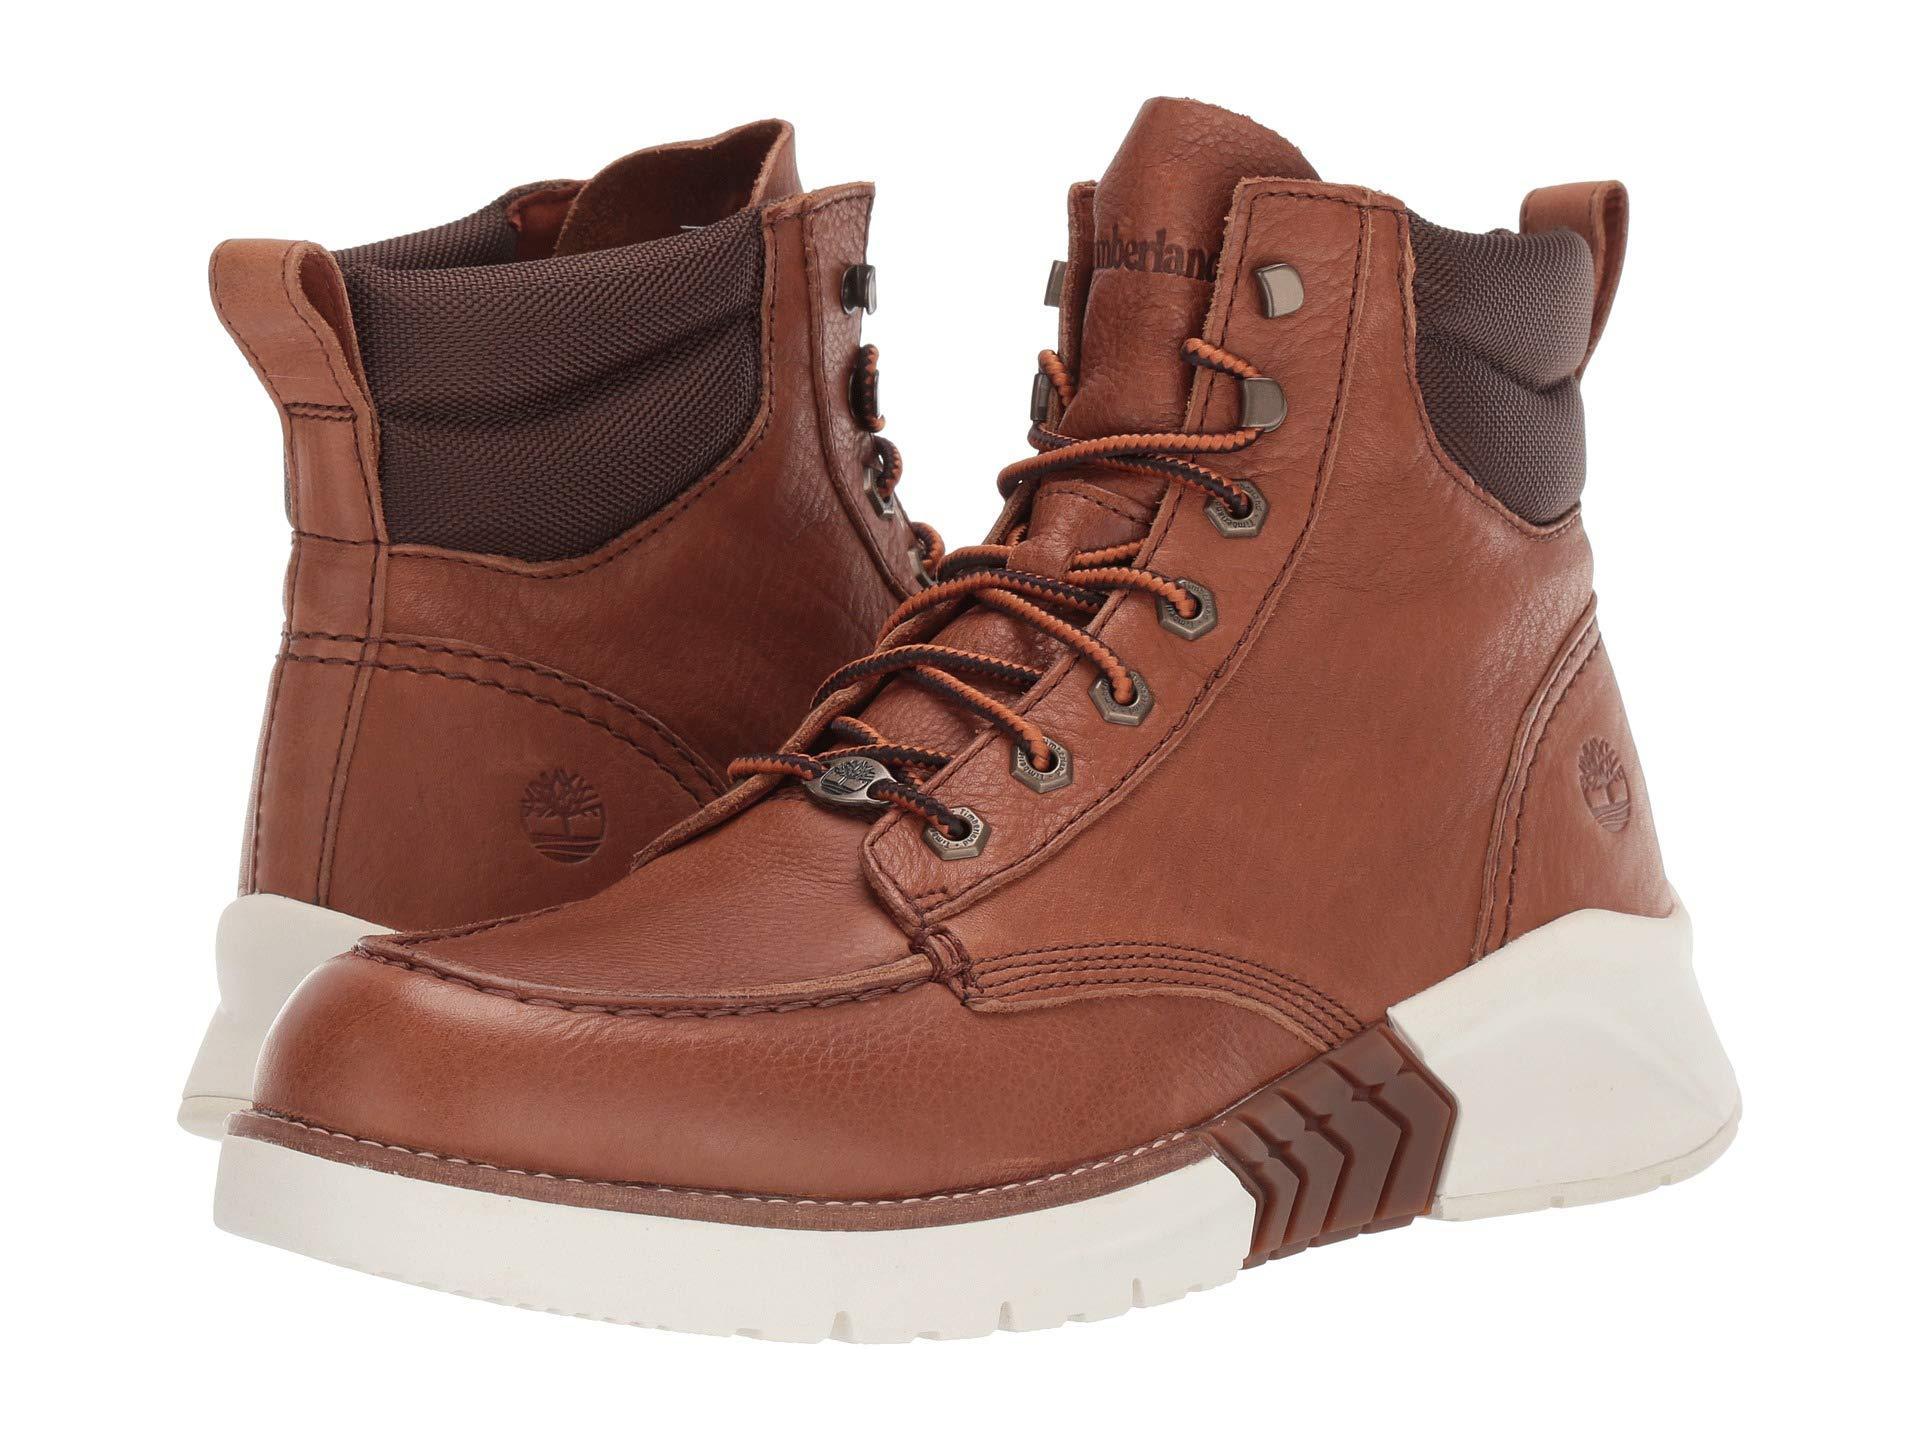 Timberland Leather M.t.c.r. Moc Toe Boot in Brown for Men - Lyst